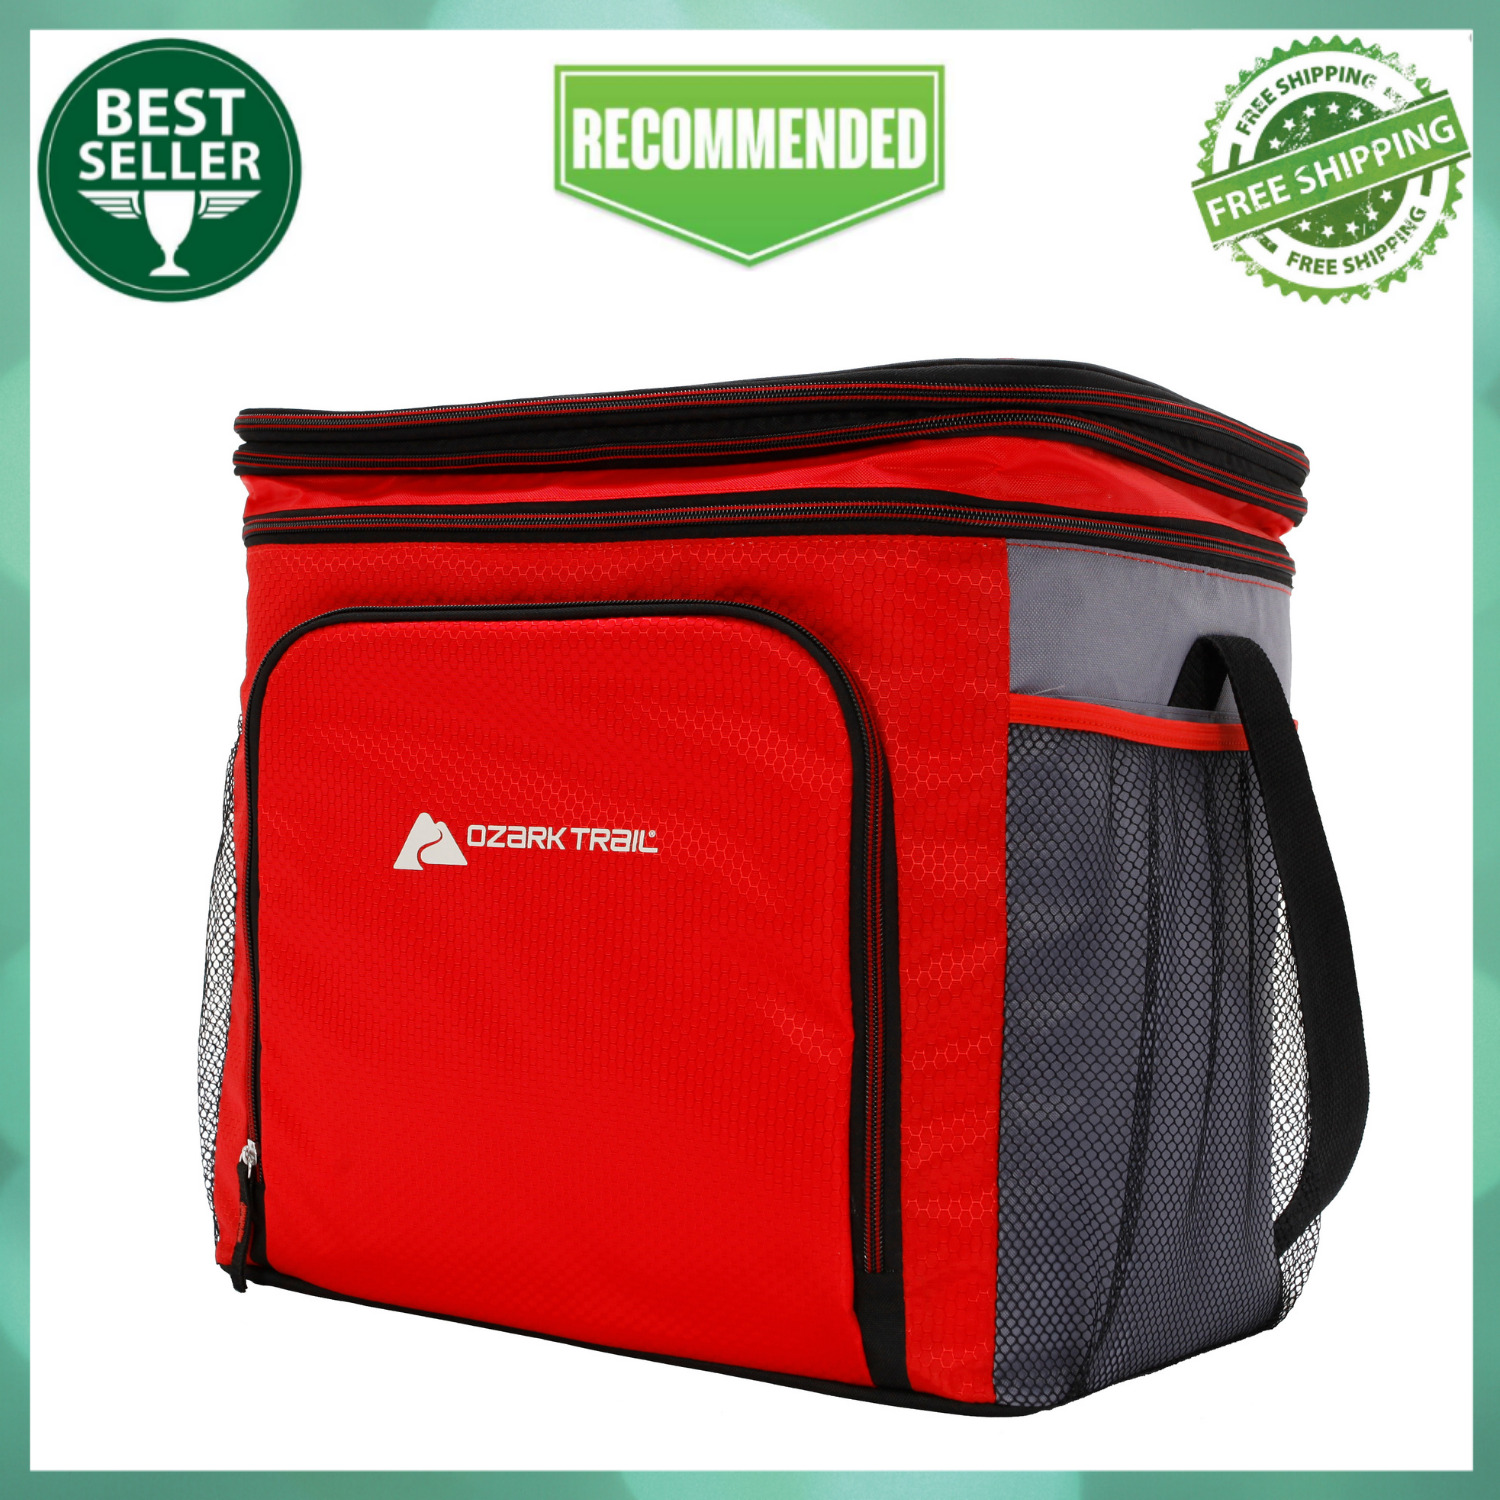 Ozark Trail 24-Can Camping Soft-Sided Cooler with Removable Hard Liner, Red